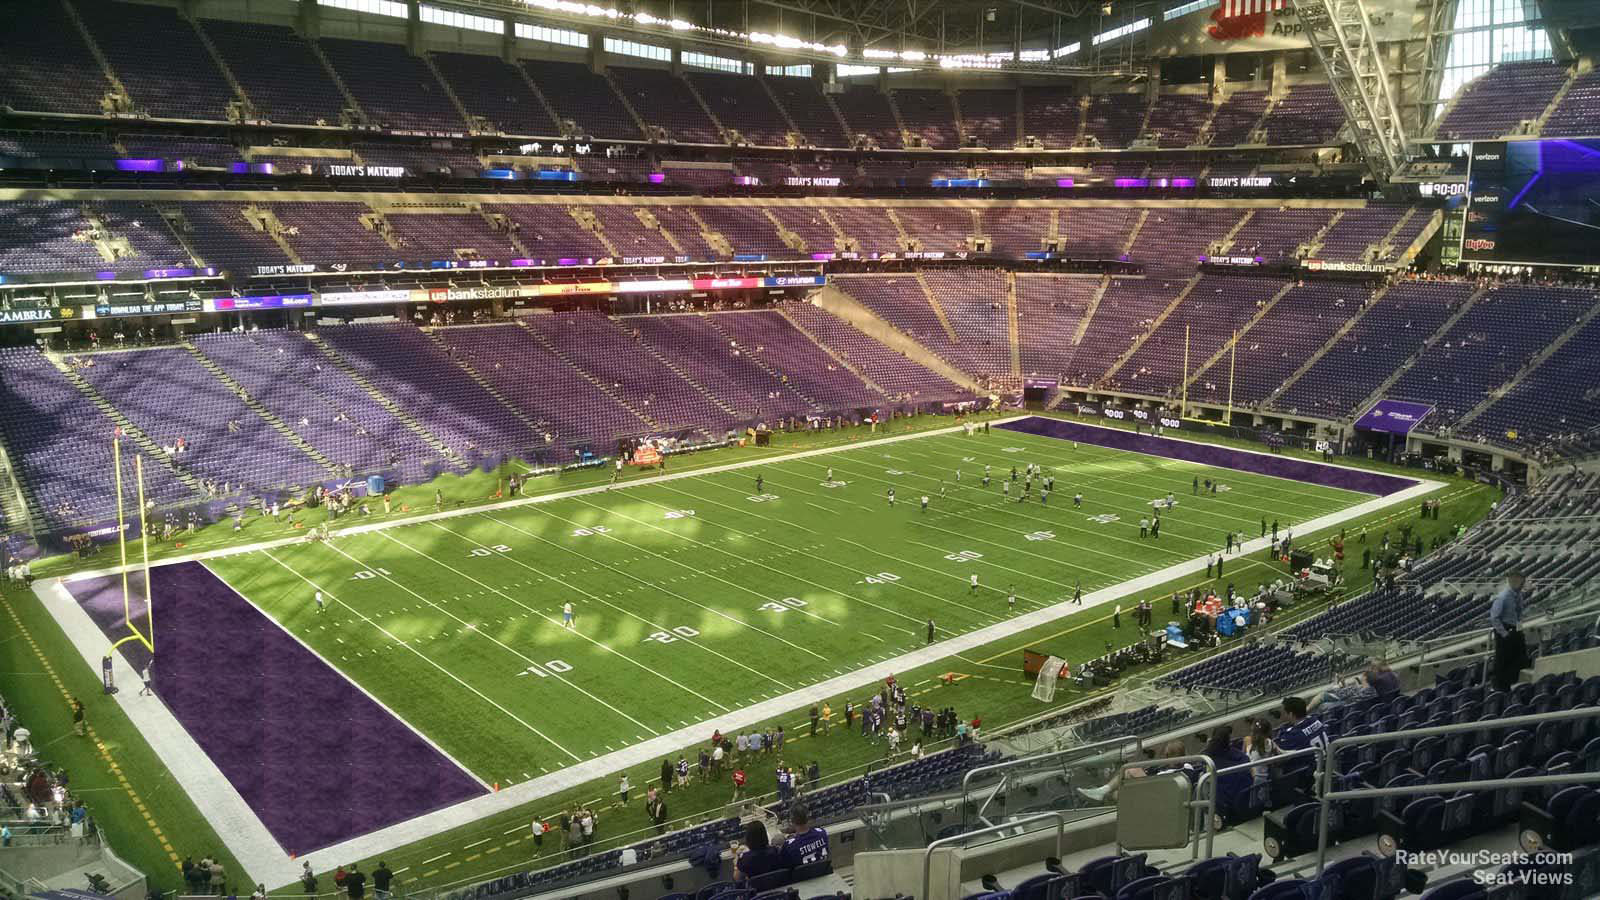 section 240, row 13 seat view  for football - u.s. bank stadium